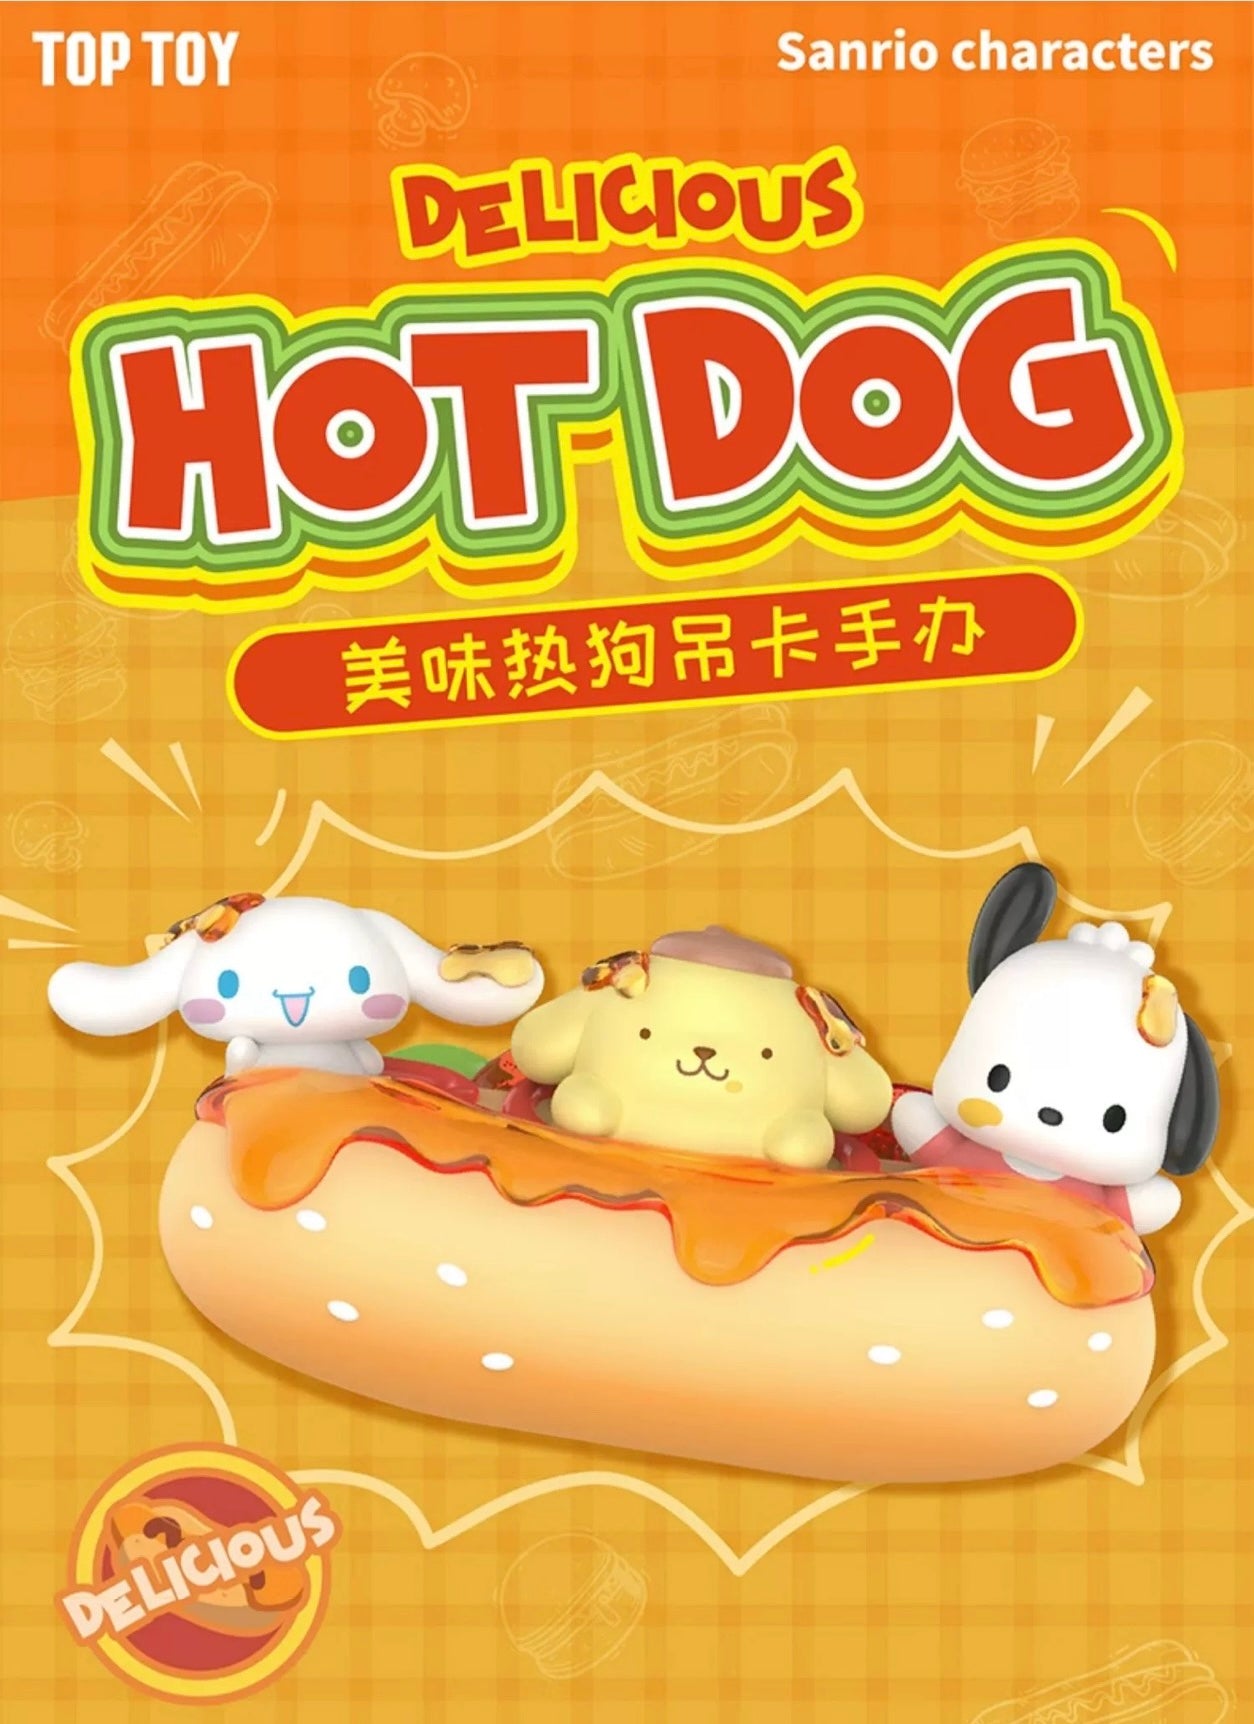 Sanrio Cinnamoroll Pompompurin Pochacco Delicious Hot Dog Figure Toy Collection - with Mobile Holding Lanyards